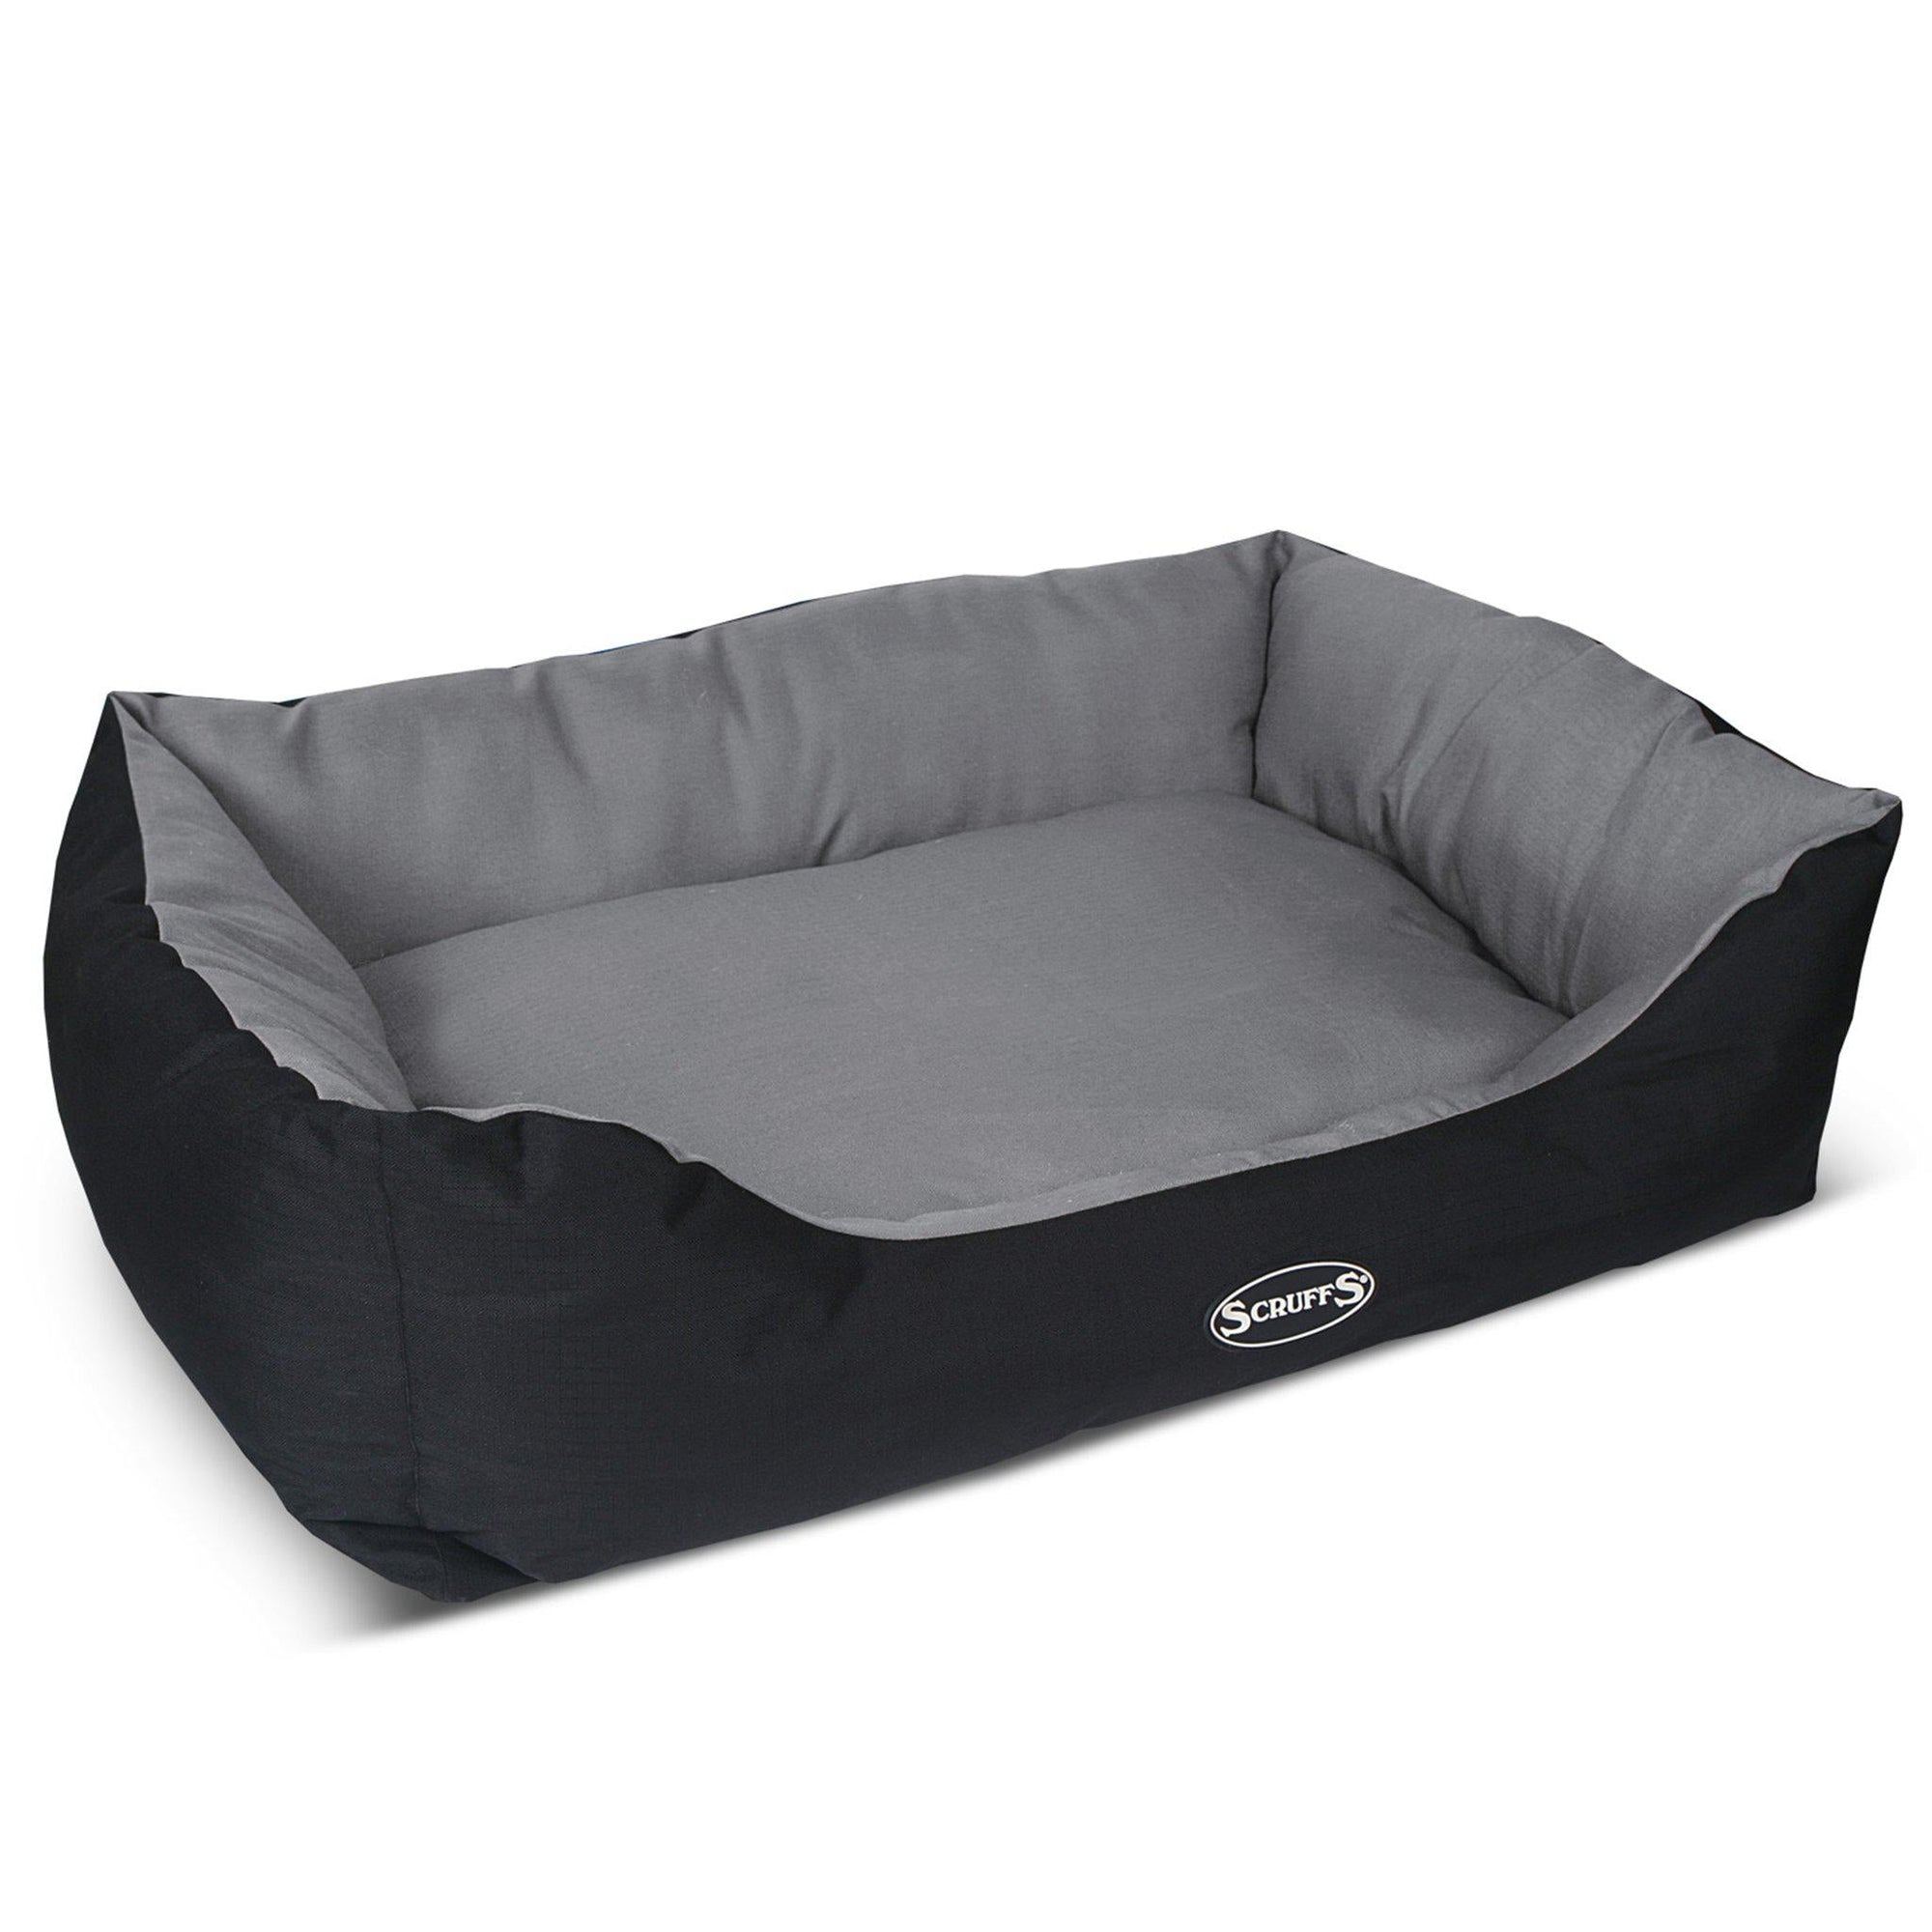 Scruffs Expedition Box Bed - ComfyPet Products